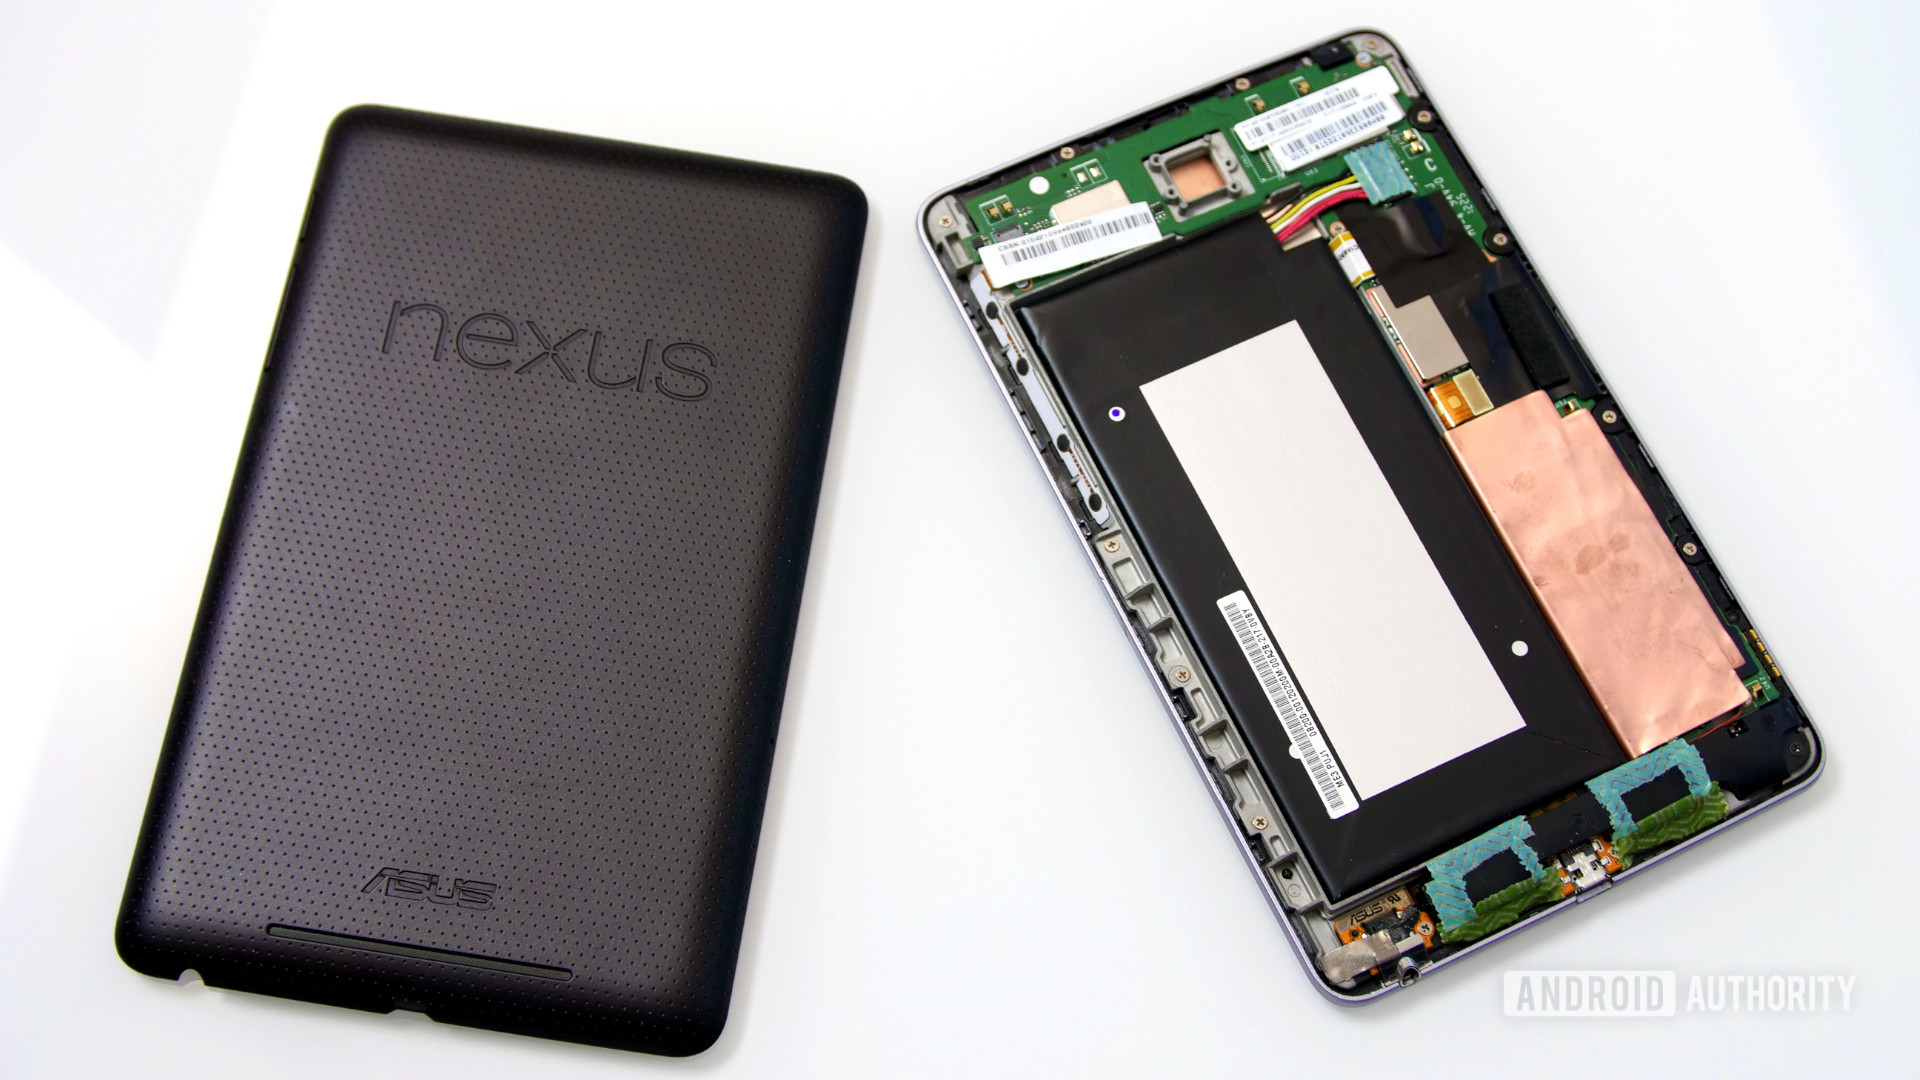 the google nexus 7 was the first great